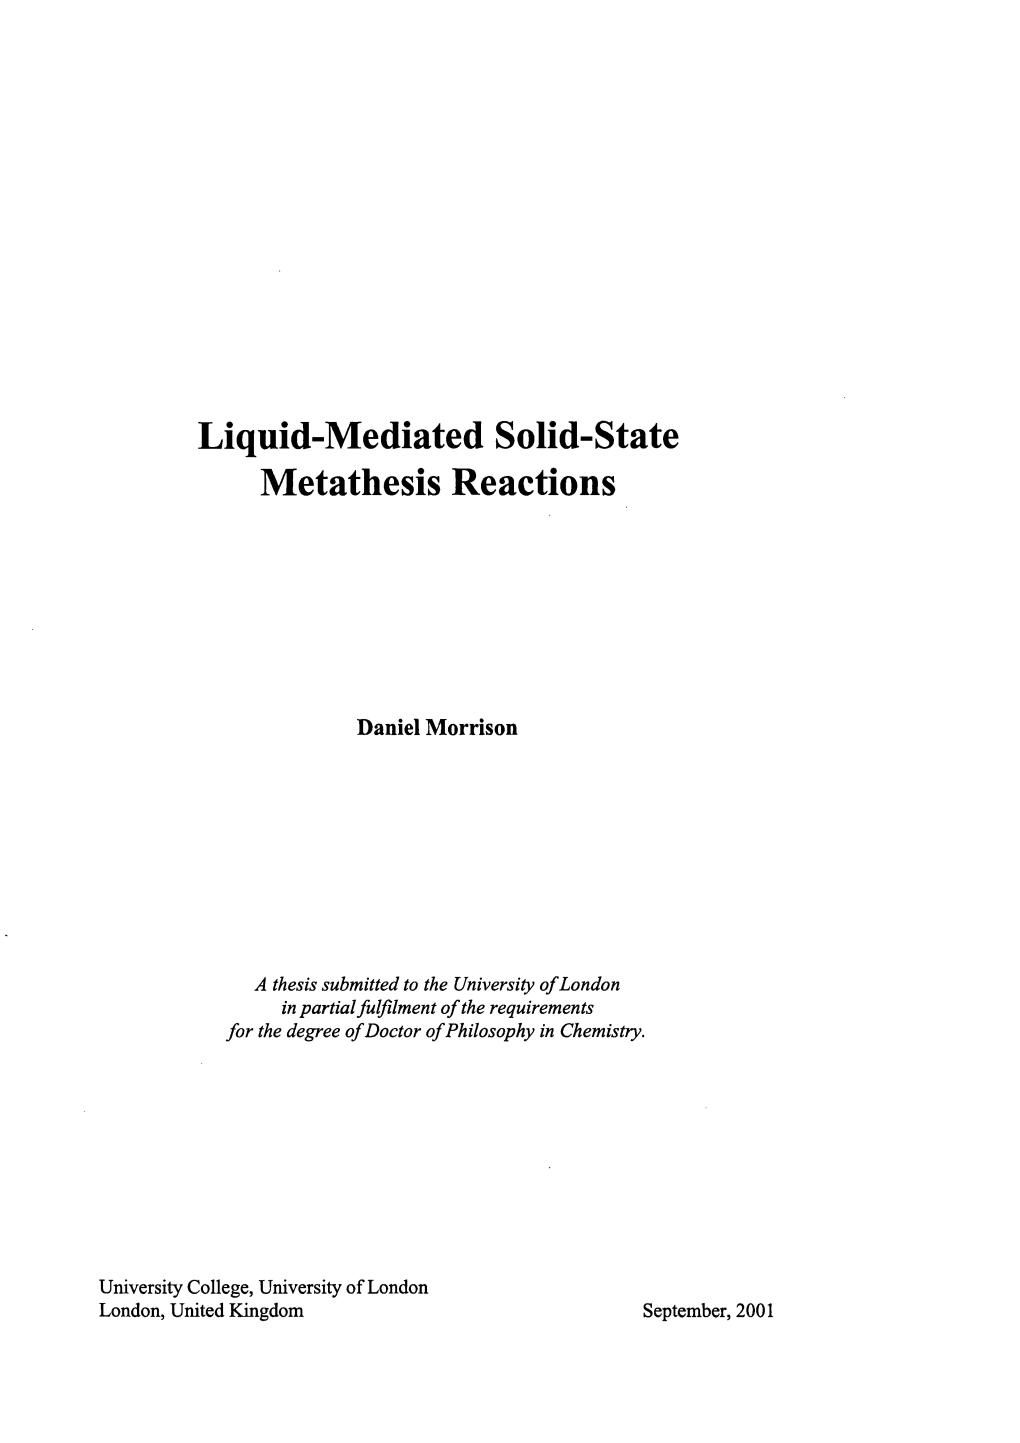 Liquid Mediated Solid-State Metathesis Reactions